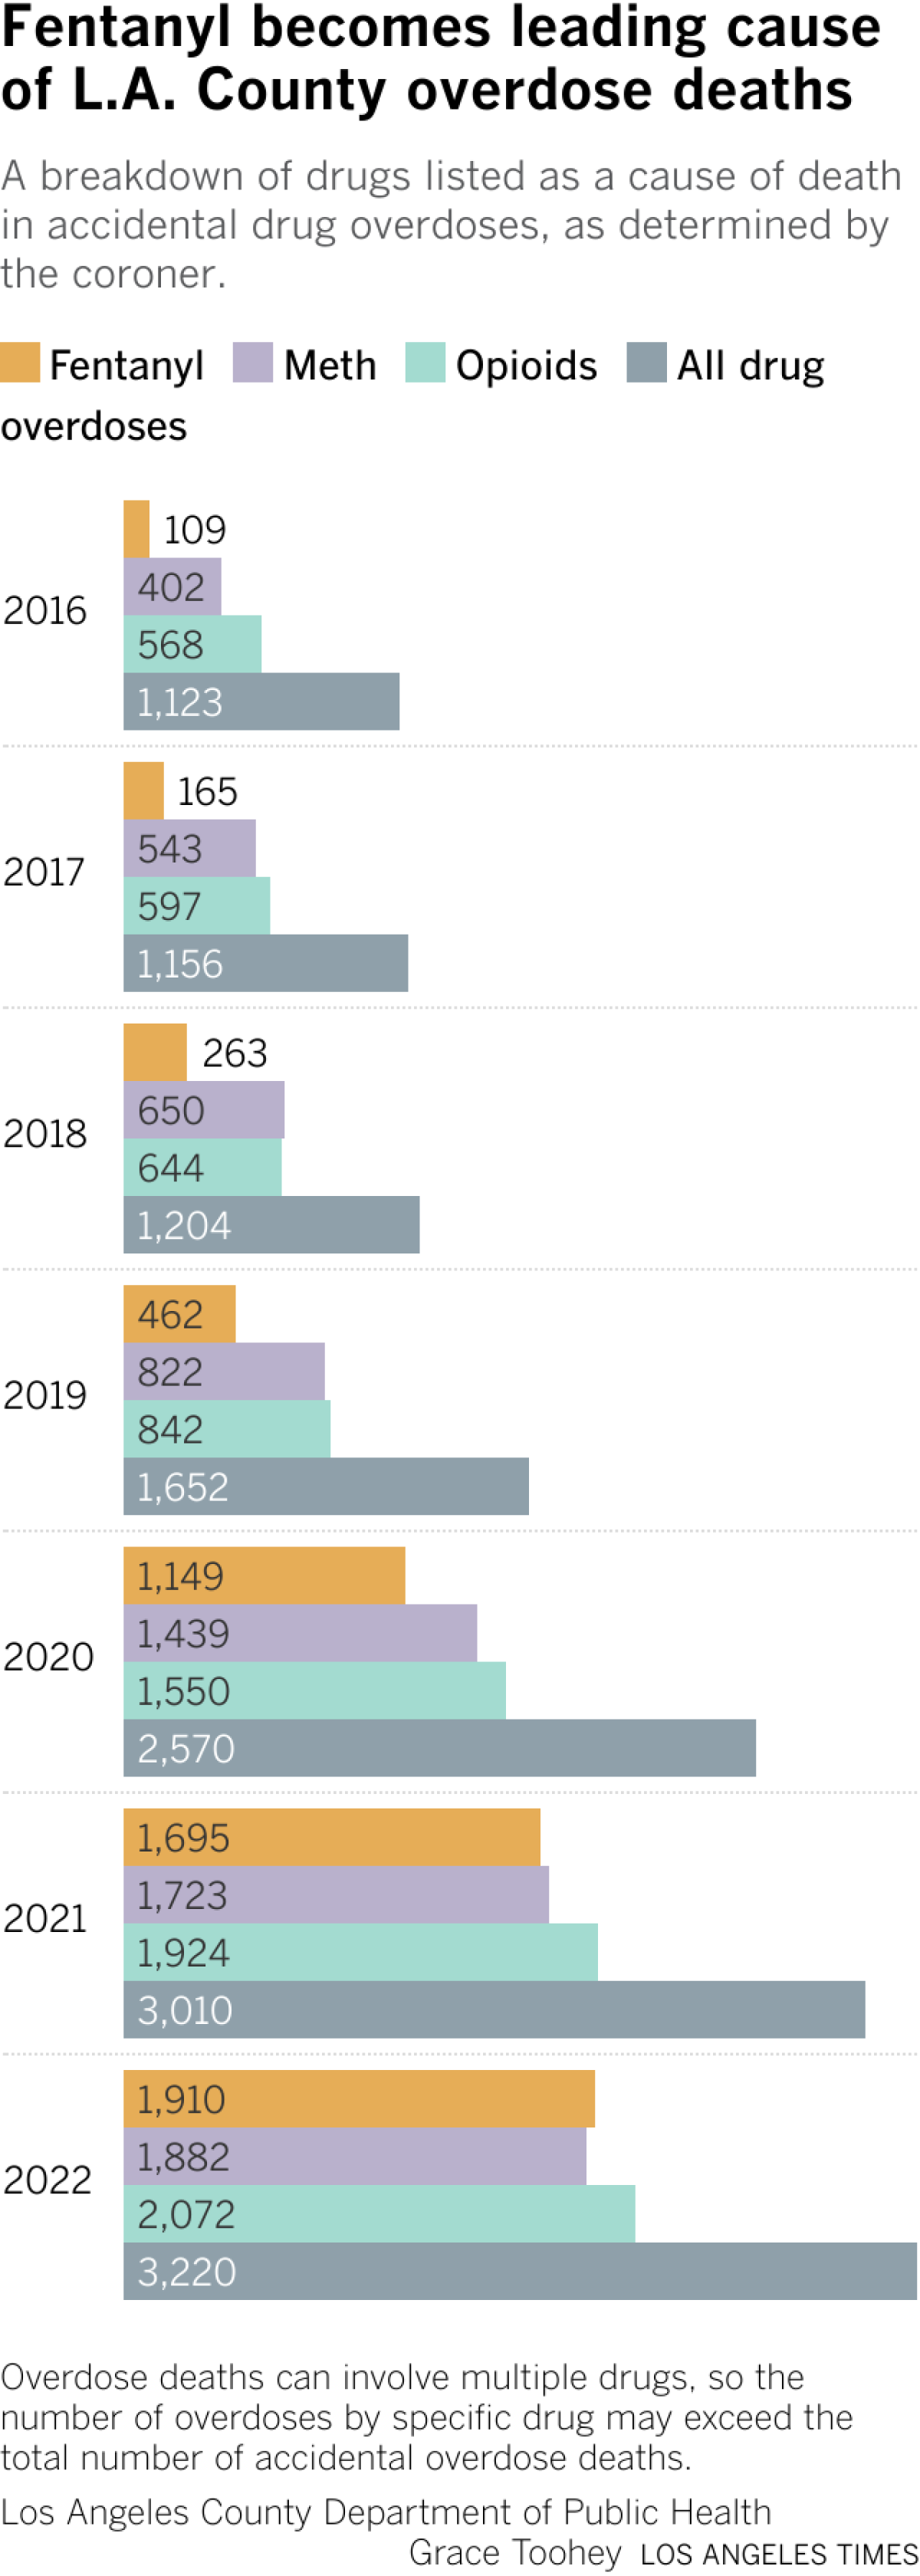 Overdose deaths in Los Angeles County have continued to rise since 2016 through 2022. The proportion of such deaths involving fentanyl has also risen drastically. 